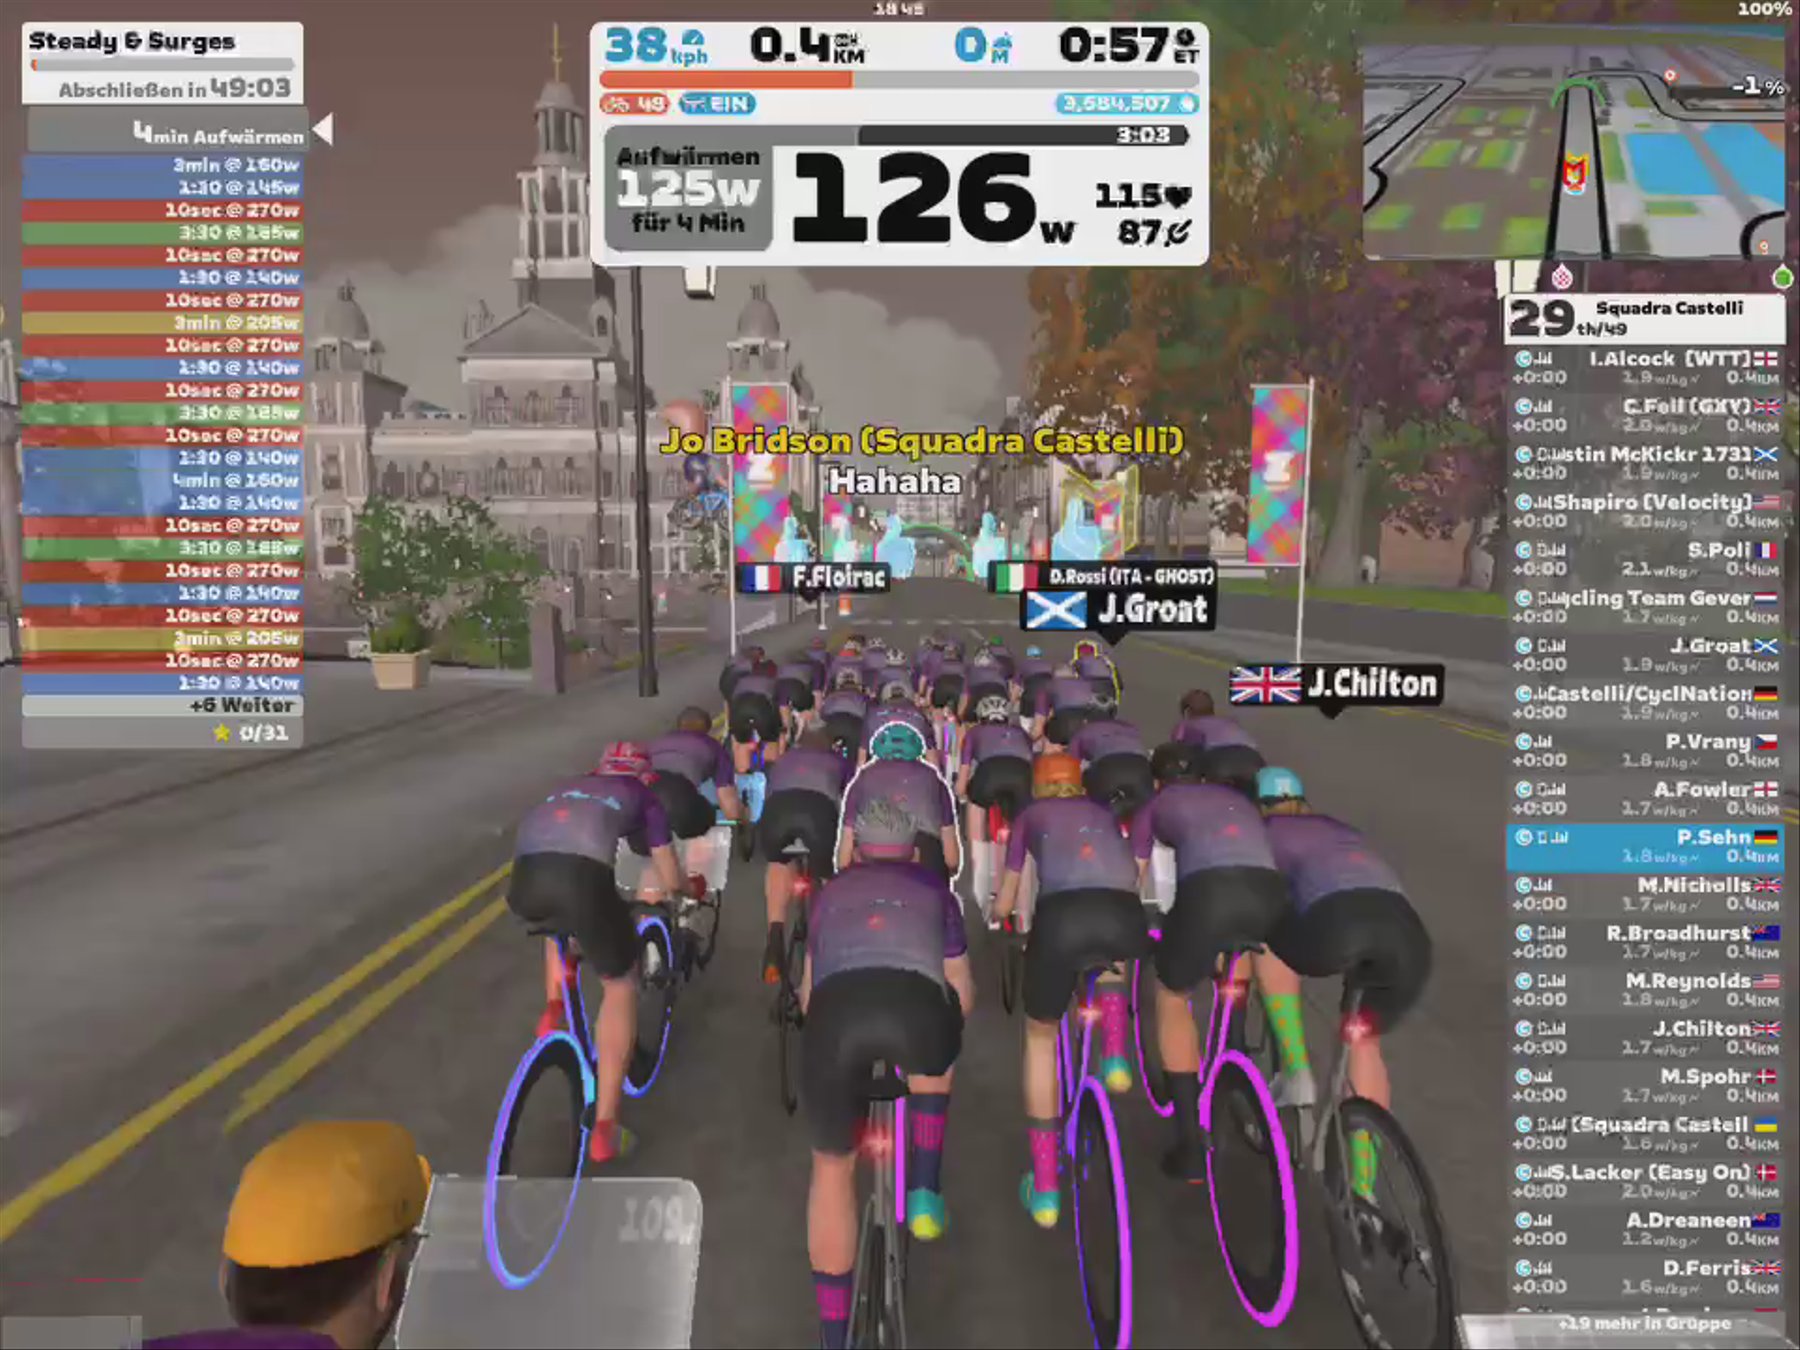 Zwift - Group Workout: Squadra Castelli (C) on The Muckle Yin in Scotland